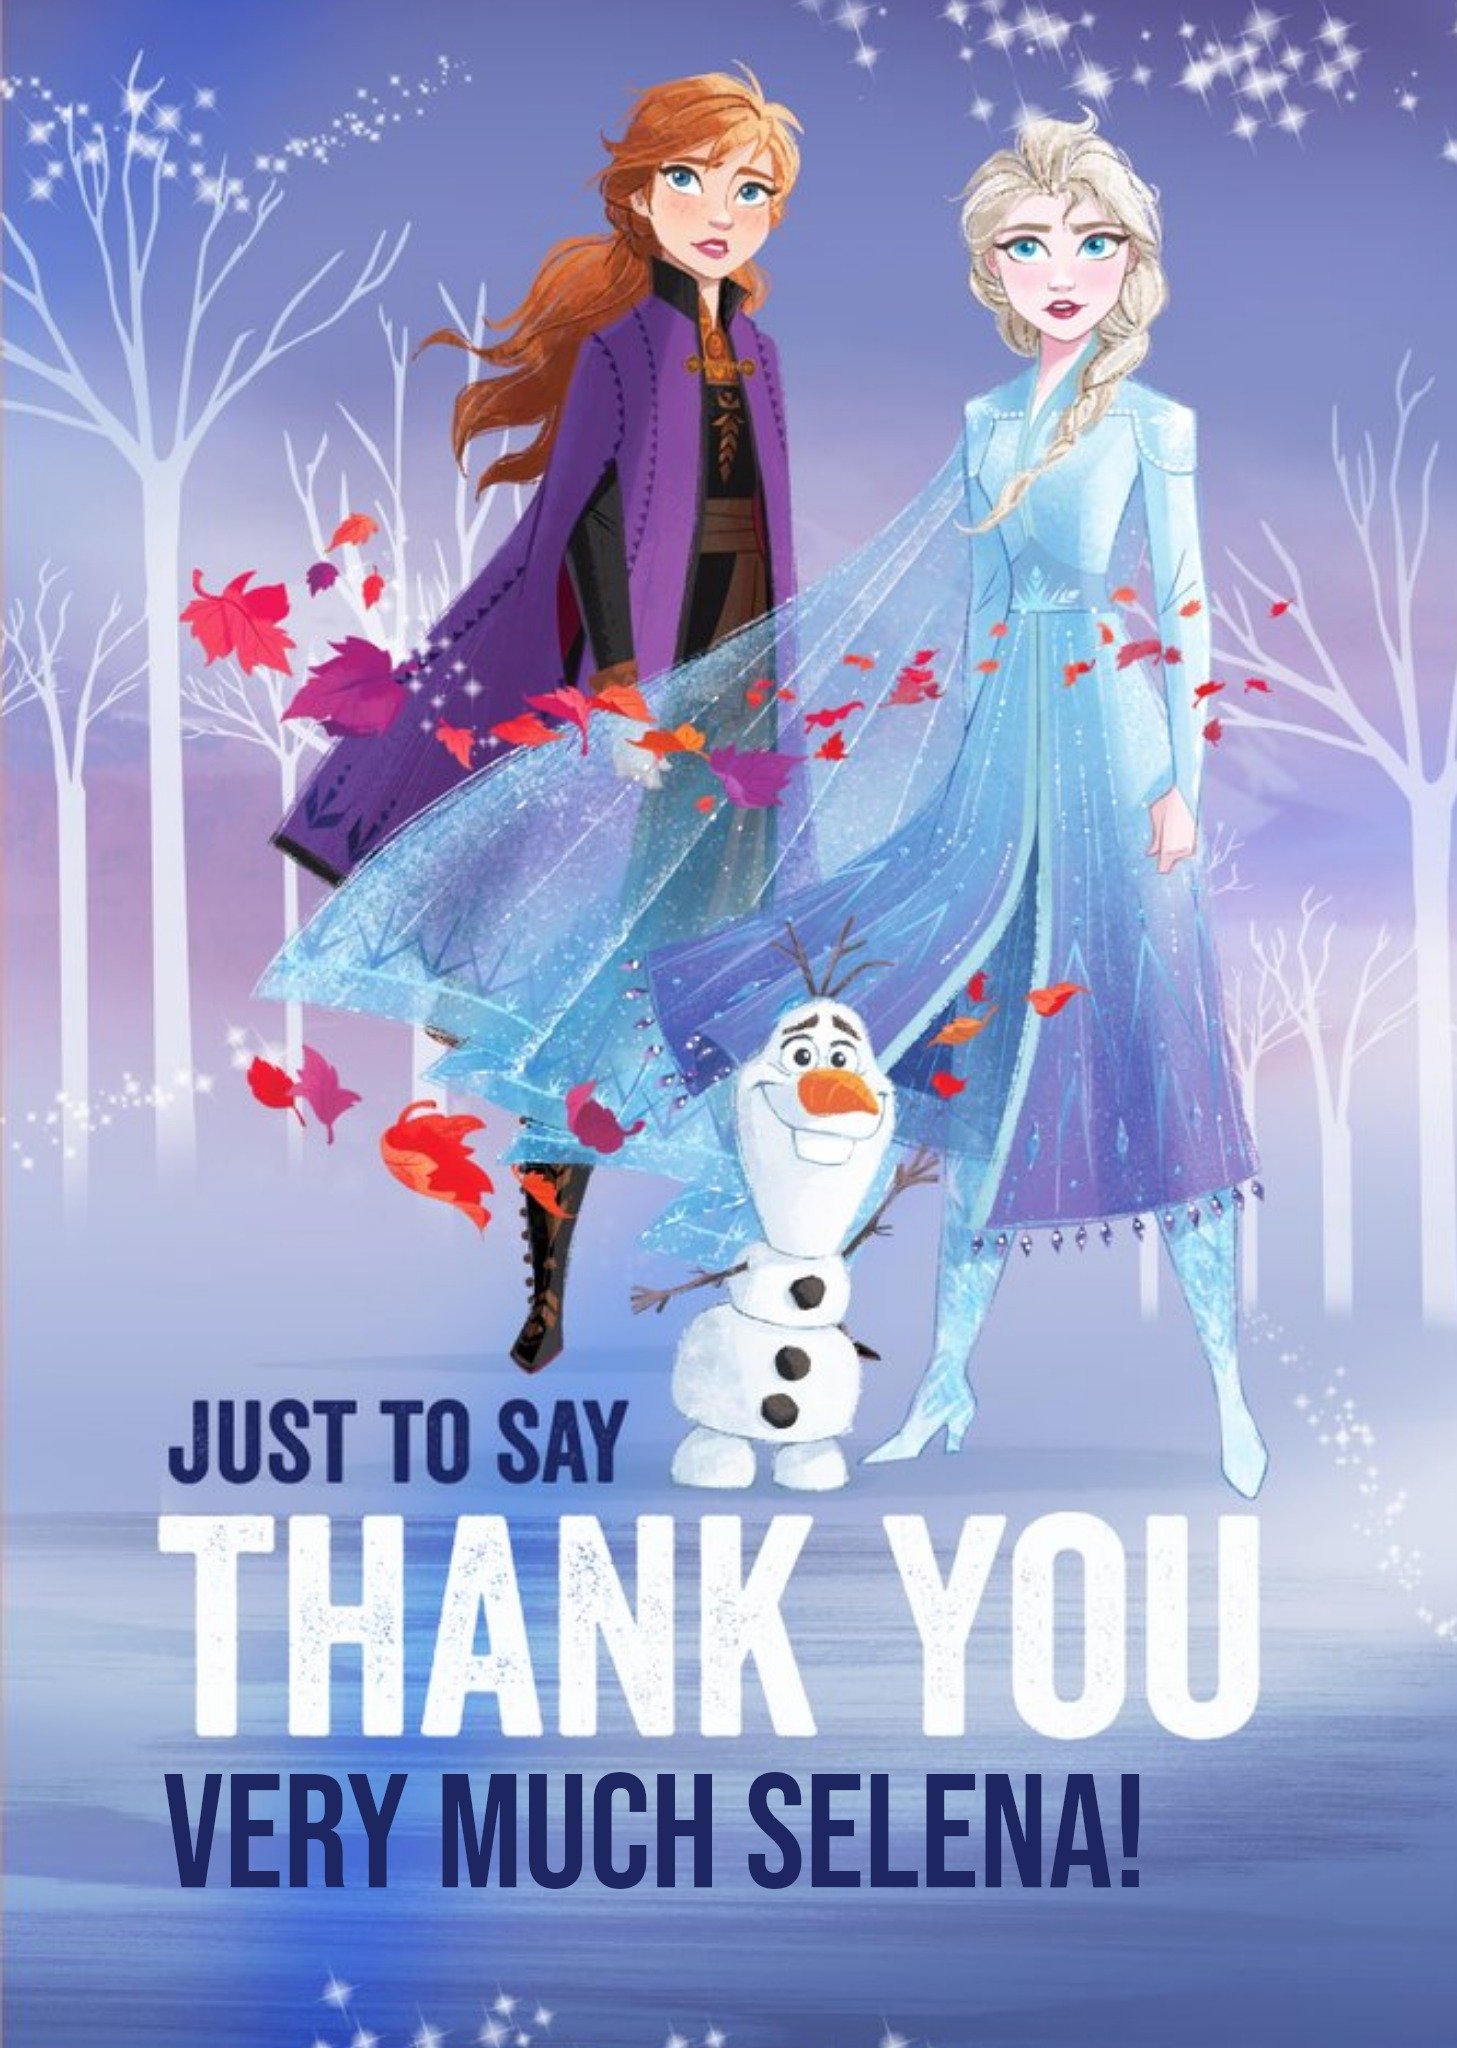 Disney Frozen 2 Anna Elsa Olaf Just To Say Thank You Card, Large